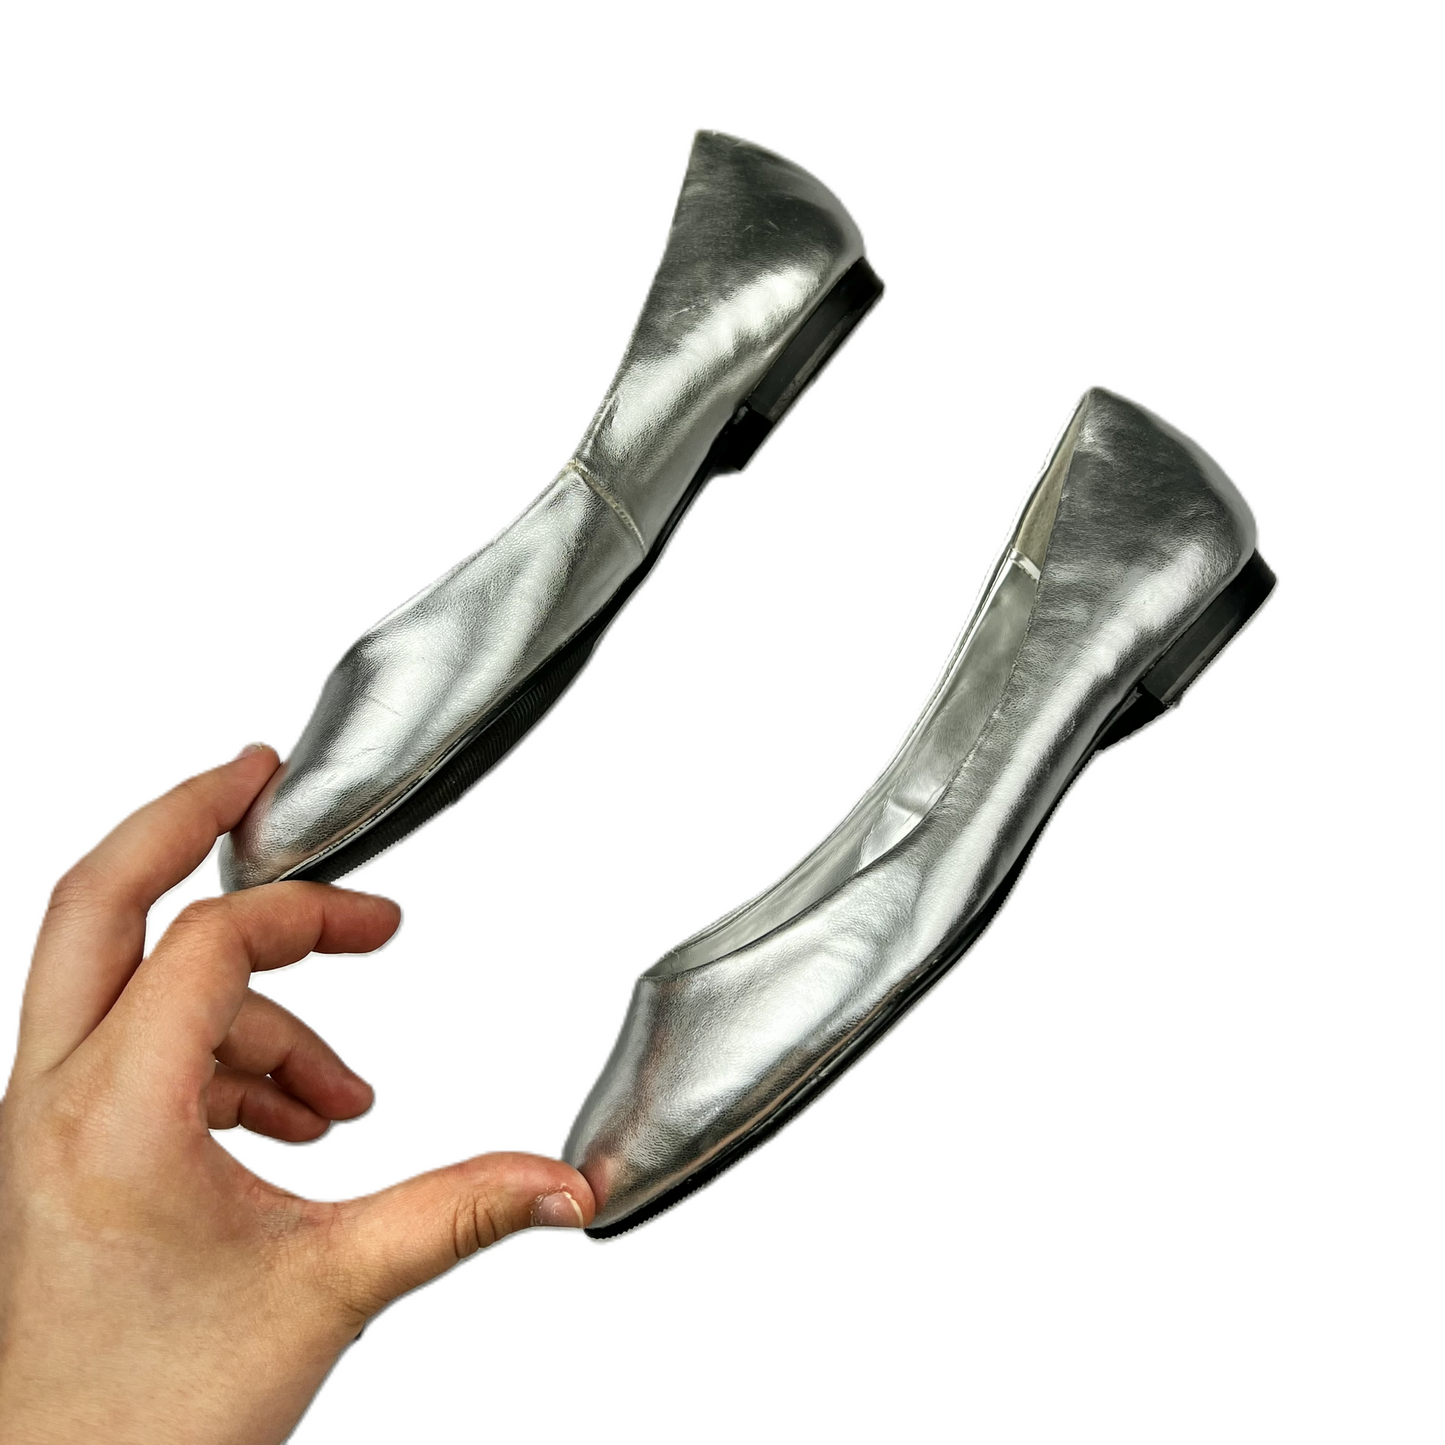 Silver Shoes Flats By Classified, Size: 6